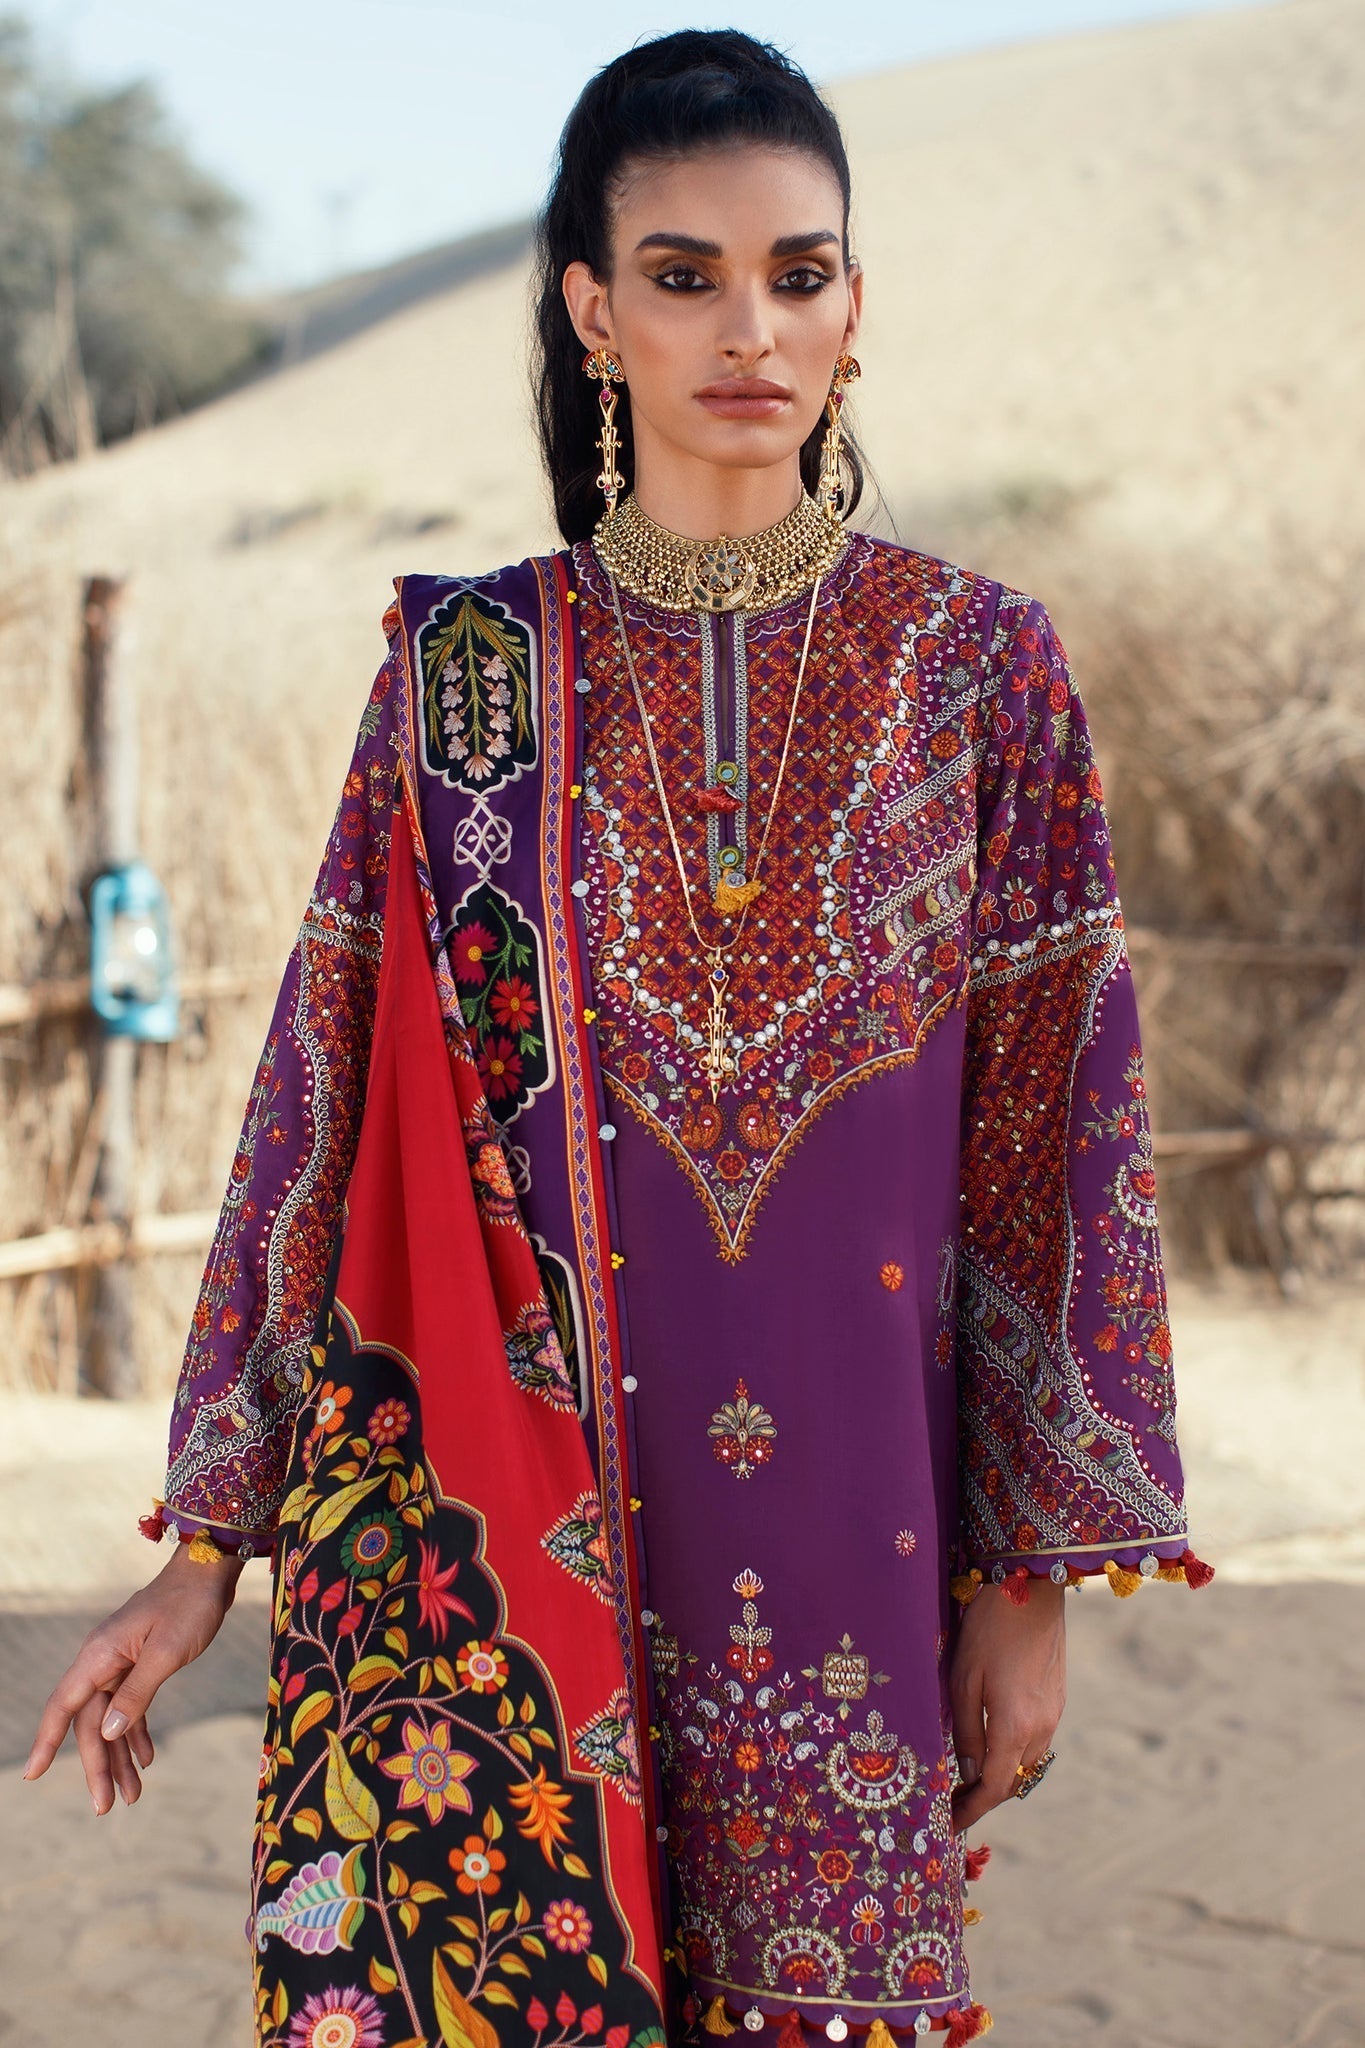 Deep Falsa Tribal Embroidered Unstitched Suit For Women